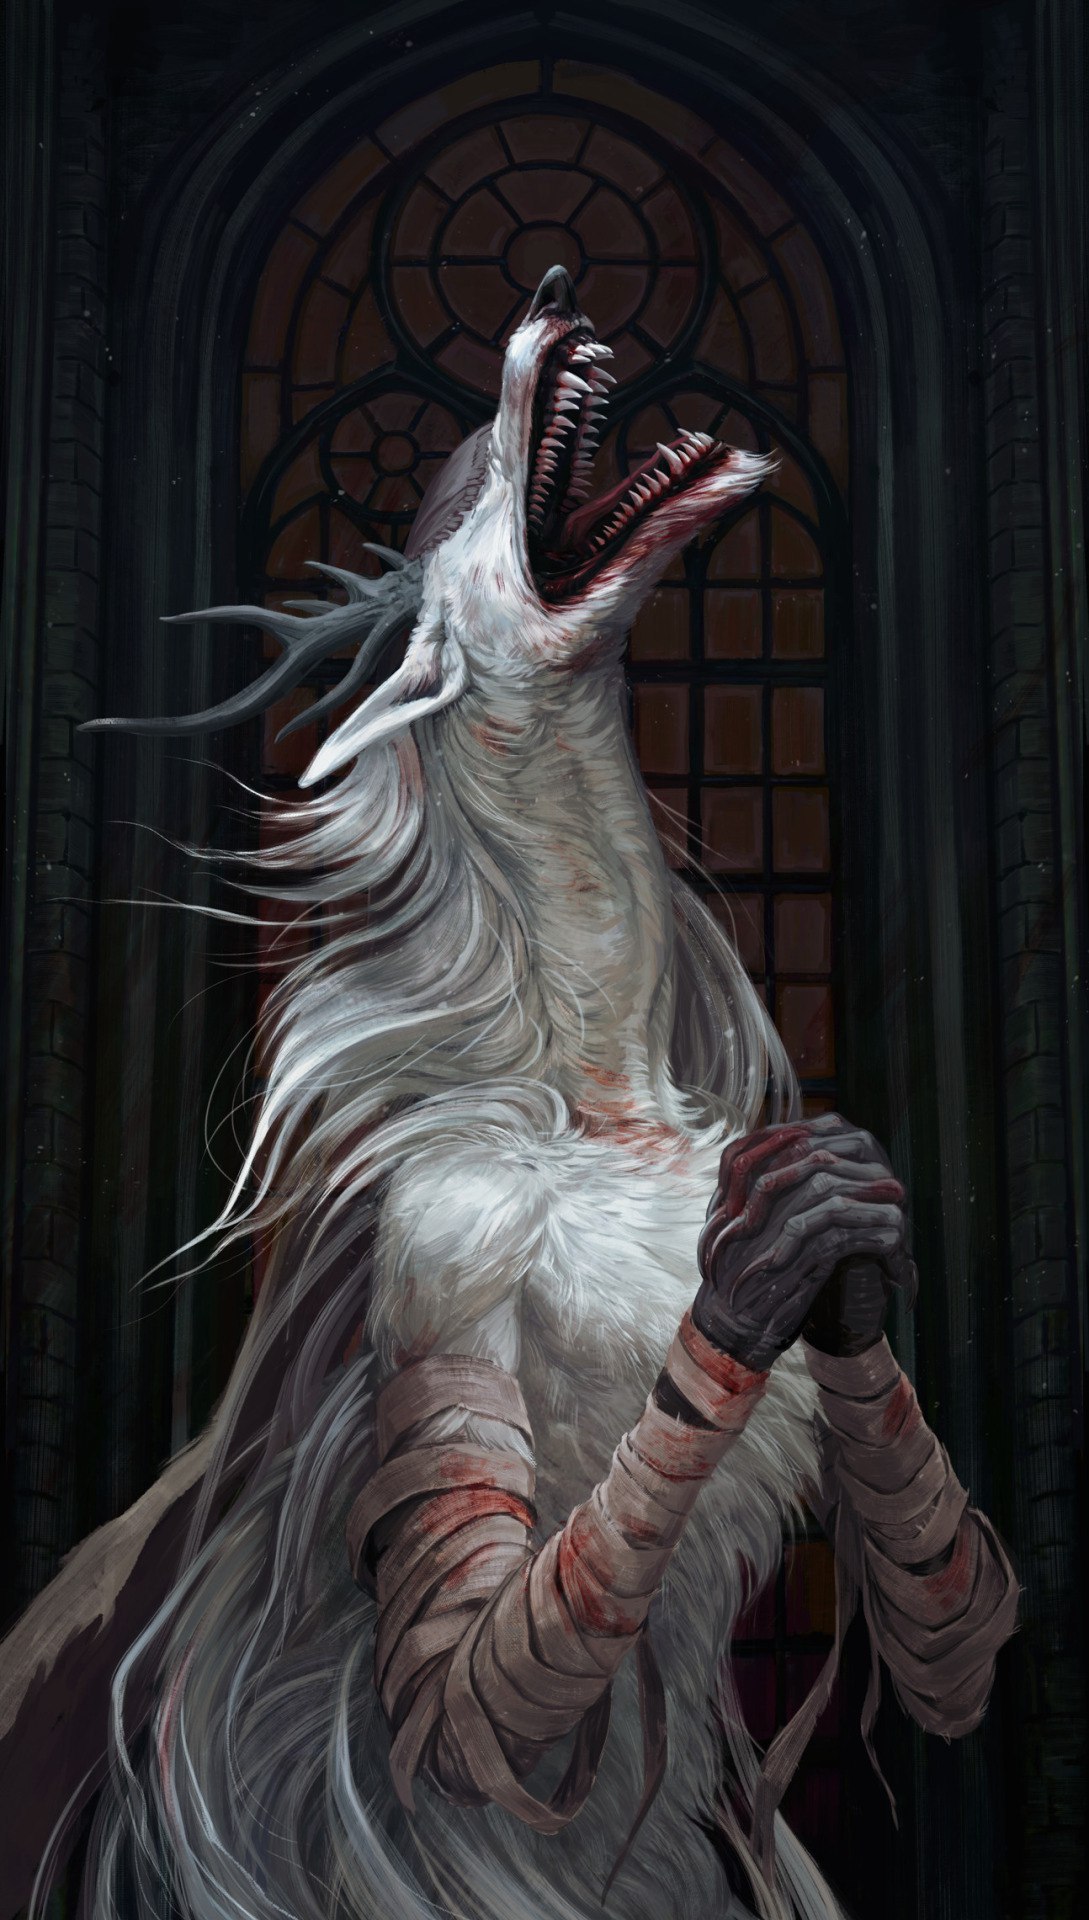 Her time has come... - Bloodborne, Vicar Amelia, Monster, Art, Not mine, Boss, Games